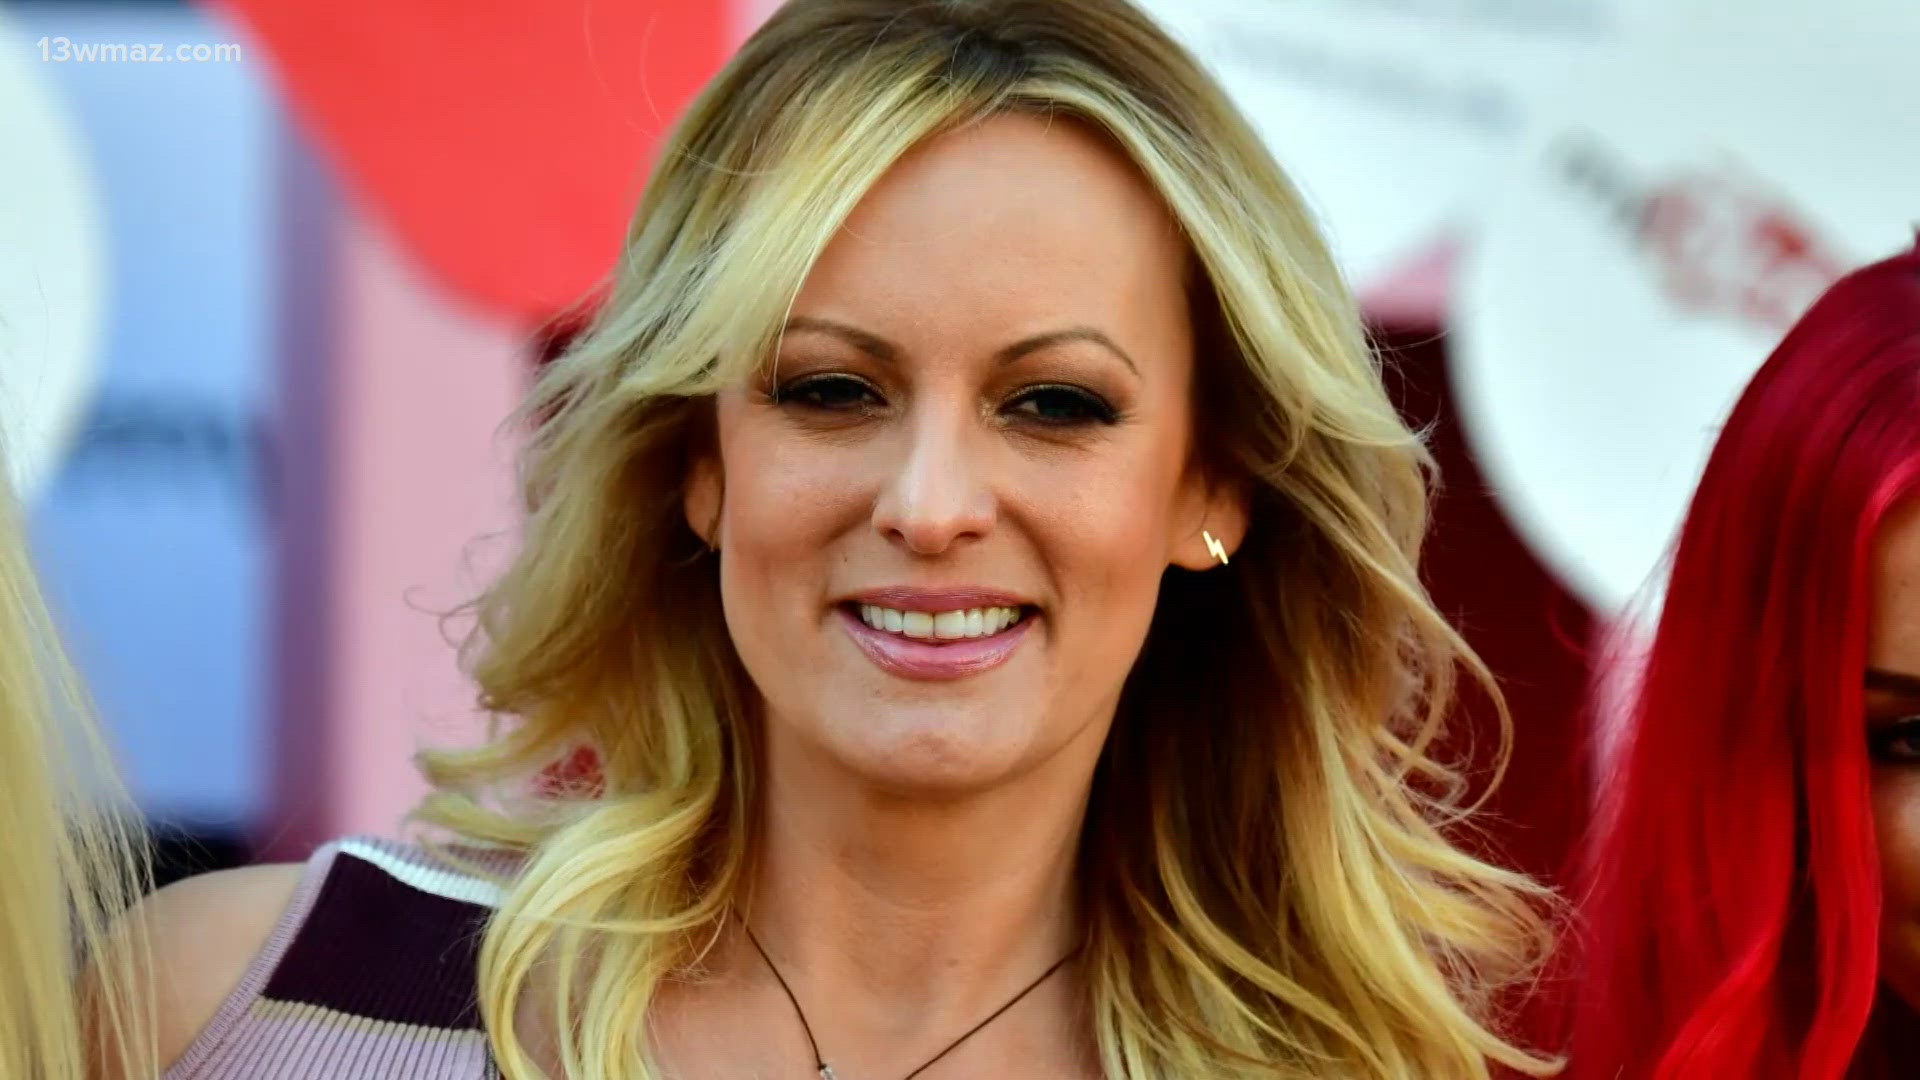 Porn star Stormy Daniels describes first meeting with Trump in New York  courtroom | Hush Money Trial | 13wmaz.com